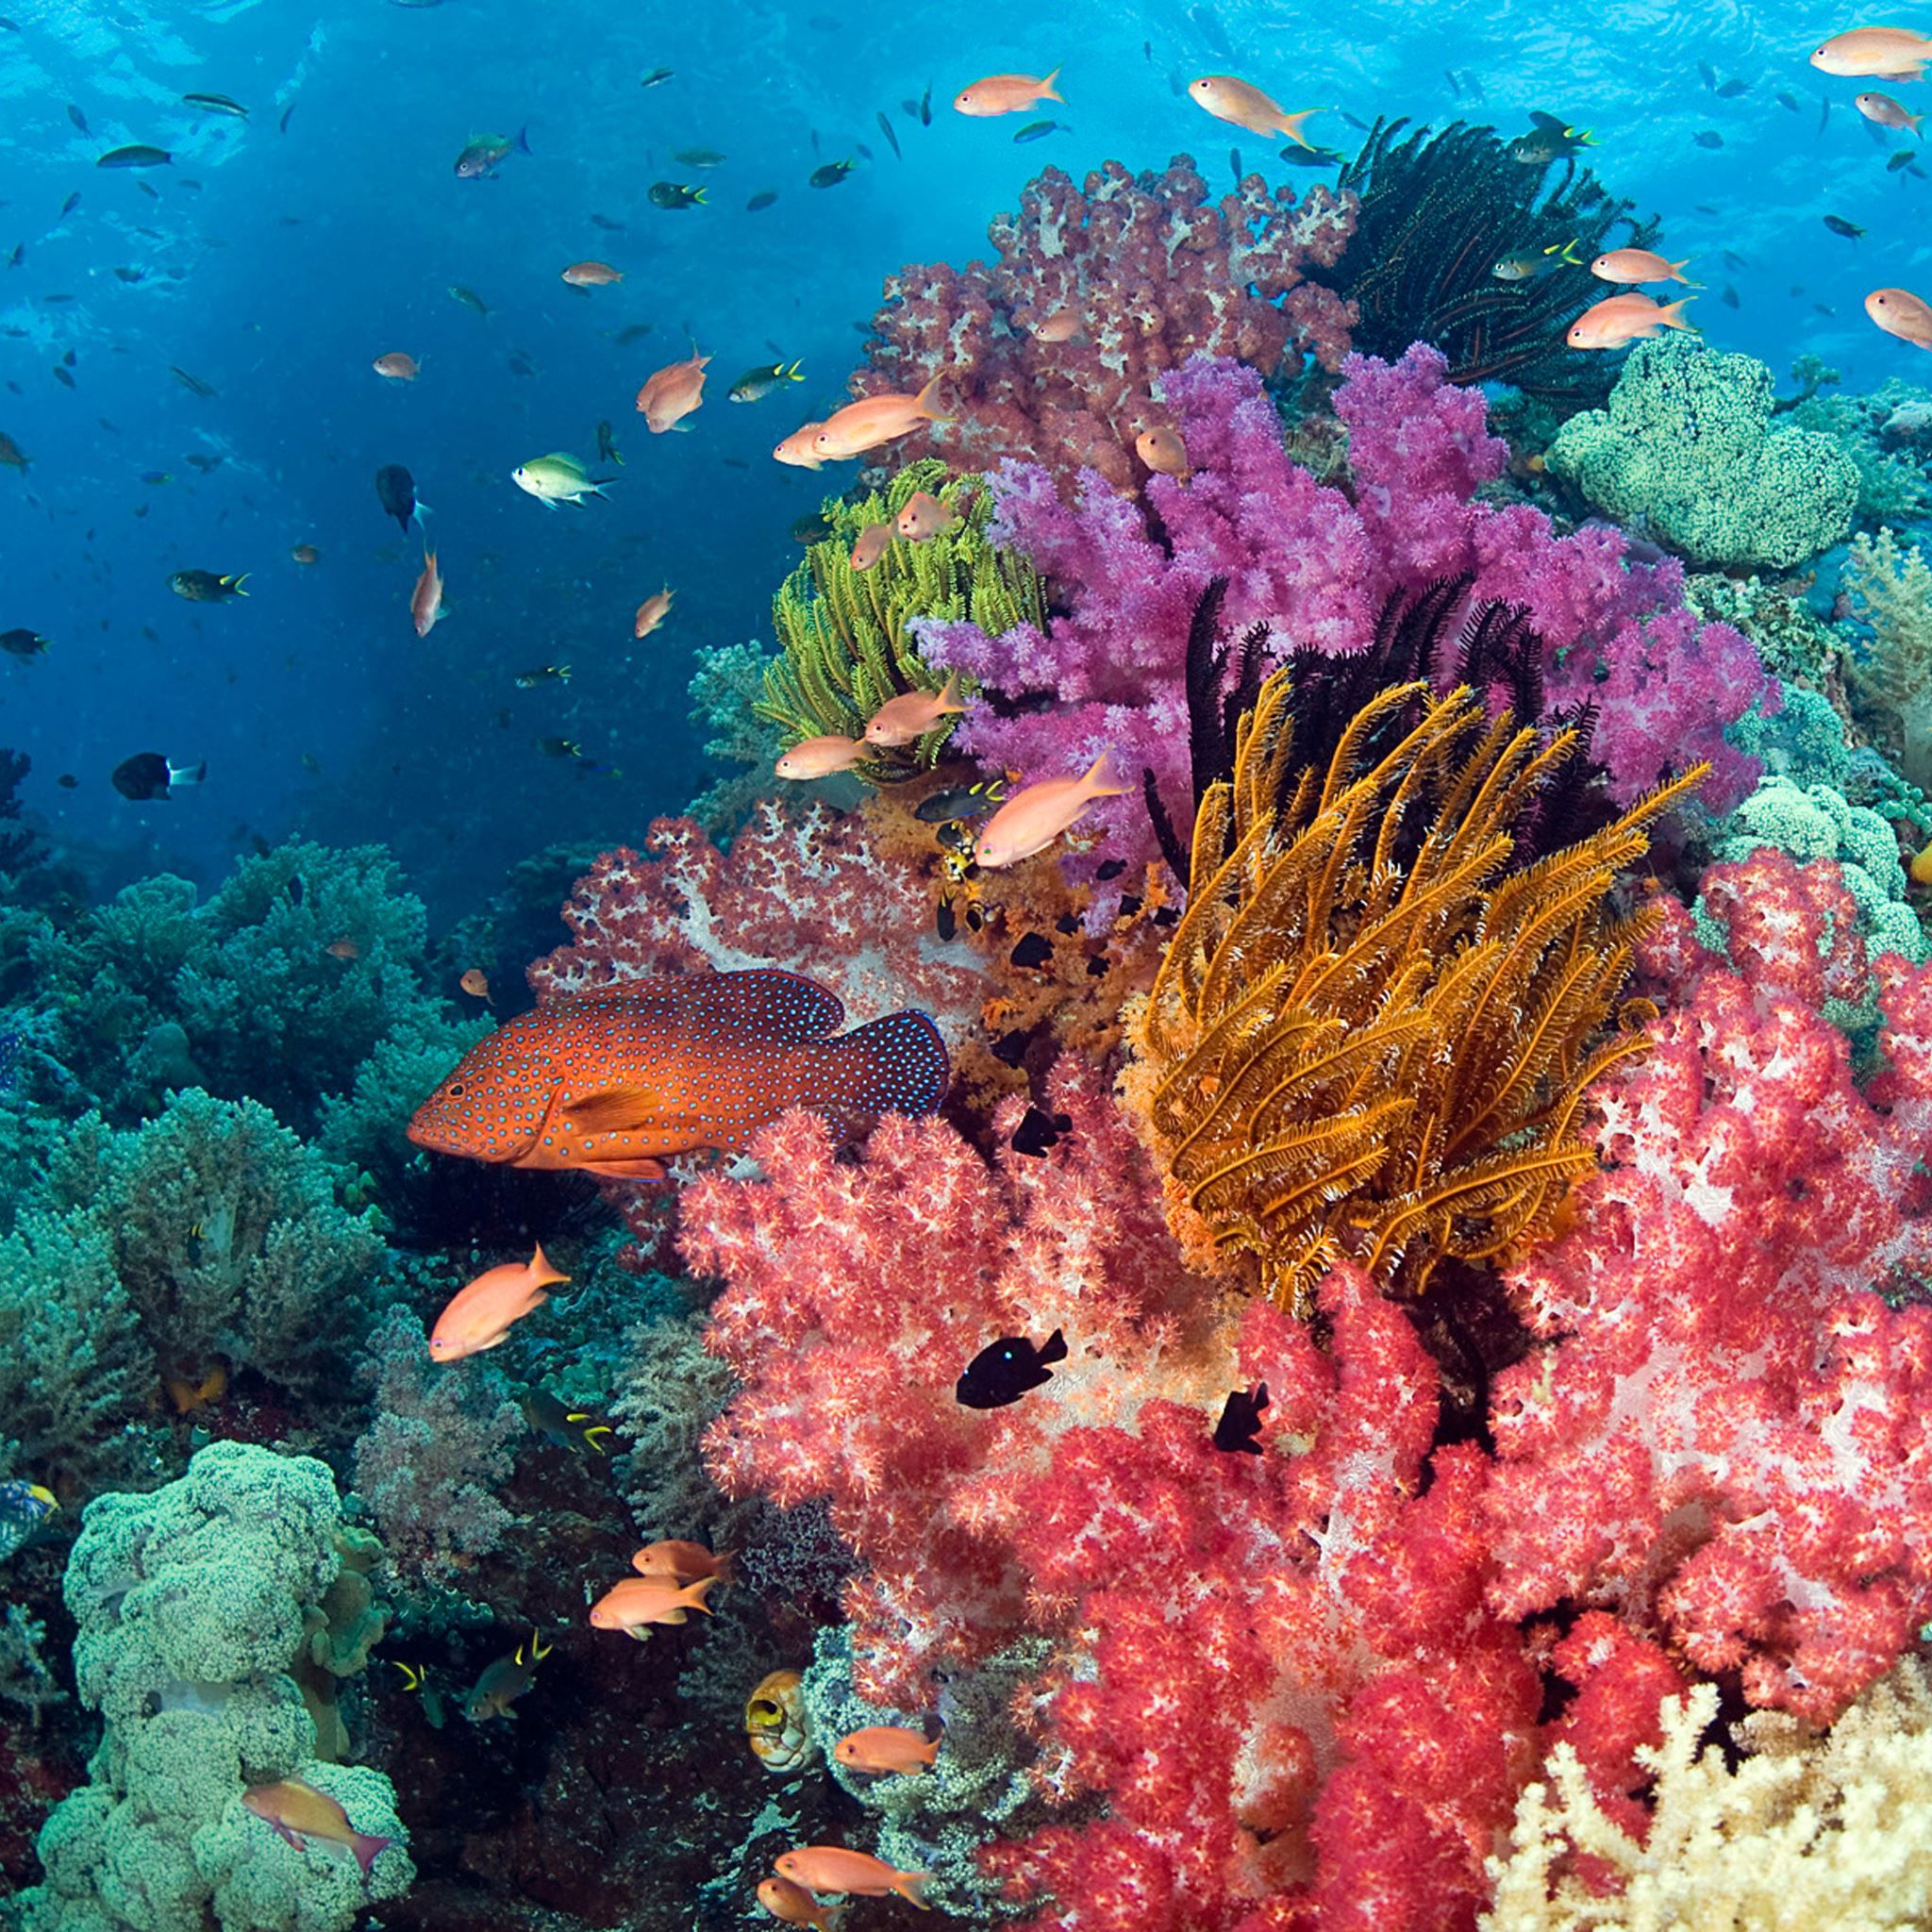 A coral reef with many different types of fish - Coral